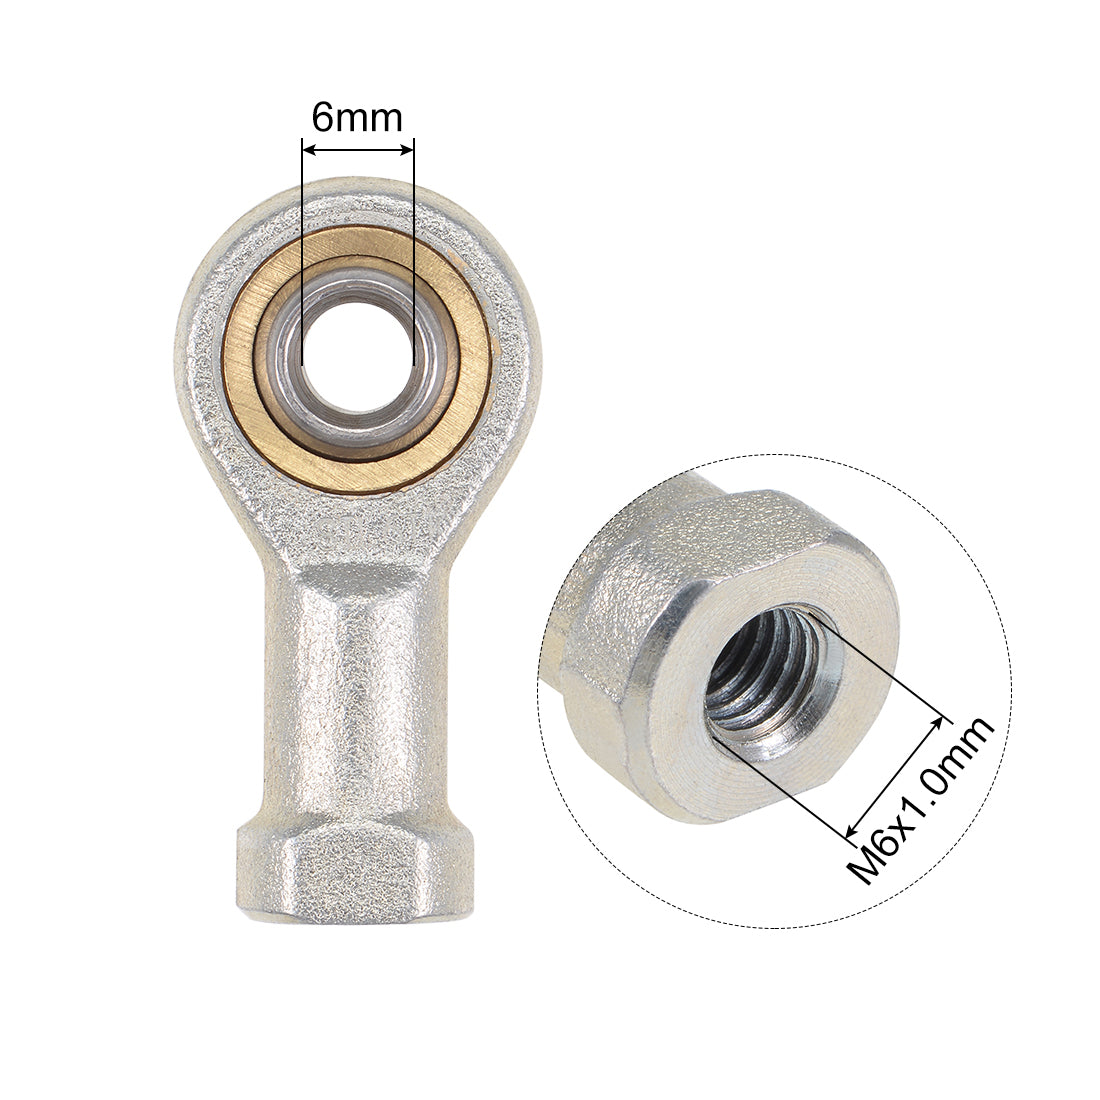 uxcell Uxcell 6mm Rod End Bearing M6x1.0mm Rod Ends Ball Joint Female Left Hand Thread